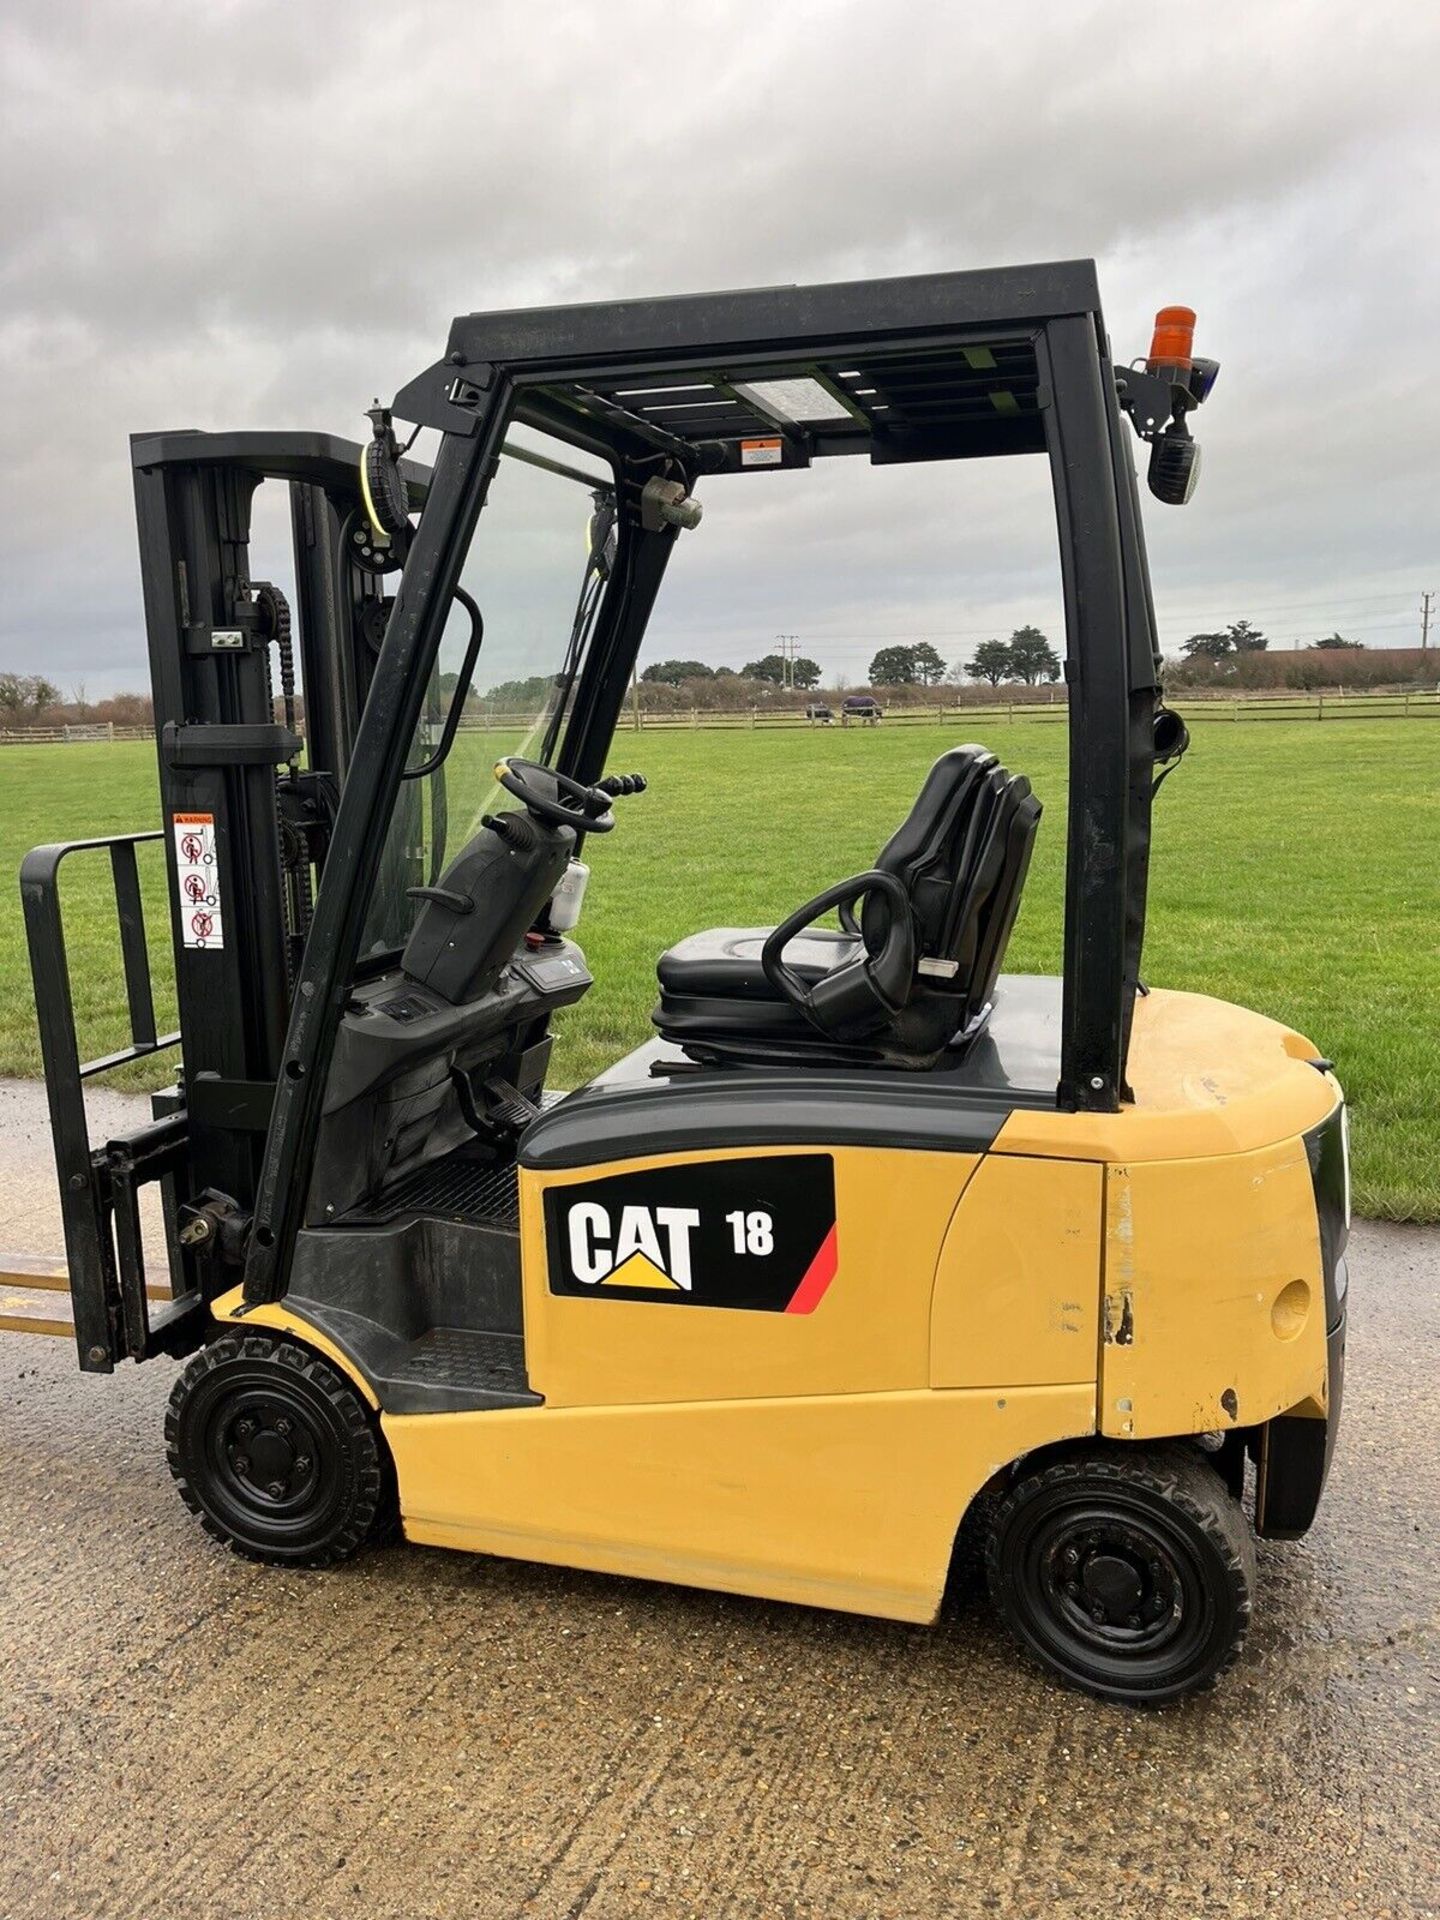 CATERPILLAR 1.8 Electric Forklift Truck (Container Spec) - Image 4 of 7